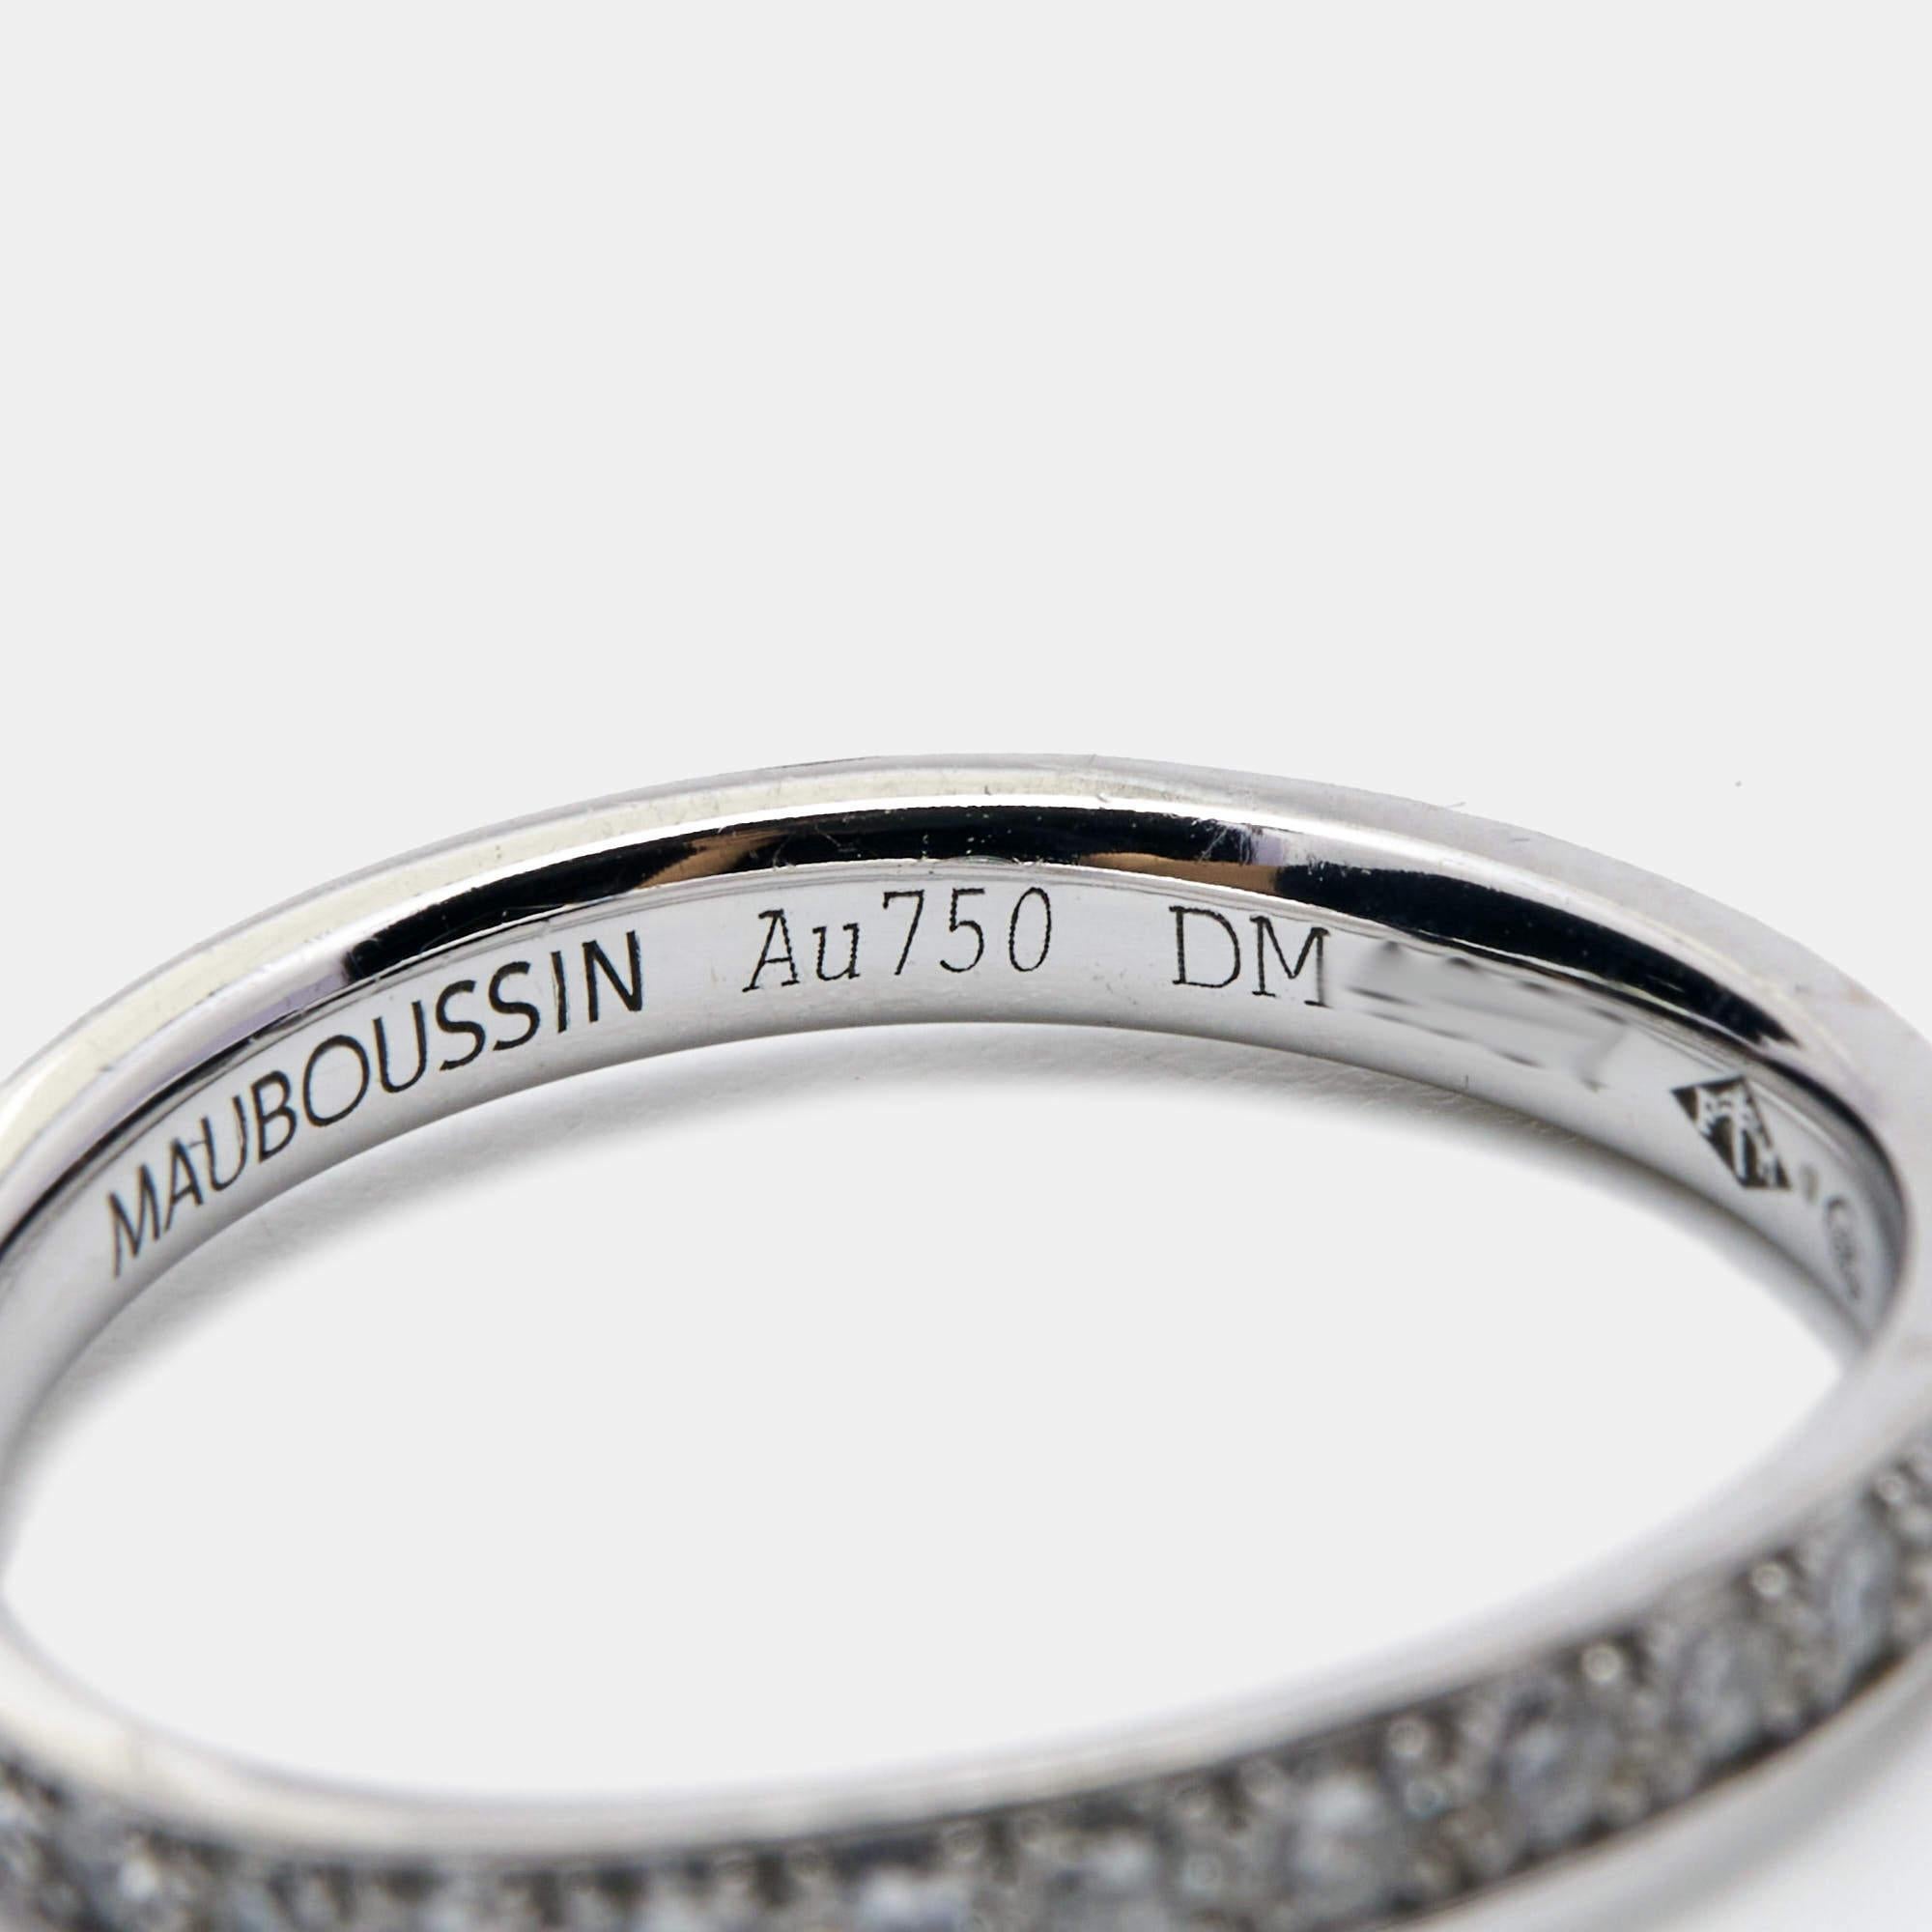 A special eternity diamond ring by Mauboussin that promises to stand out on your hand. It is a masterfully crafted piece of jewelry that embodies timeless luxury and sophisticated elegance.

